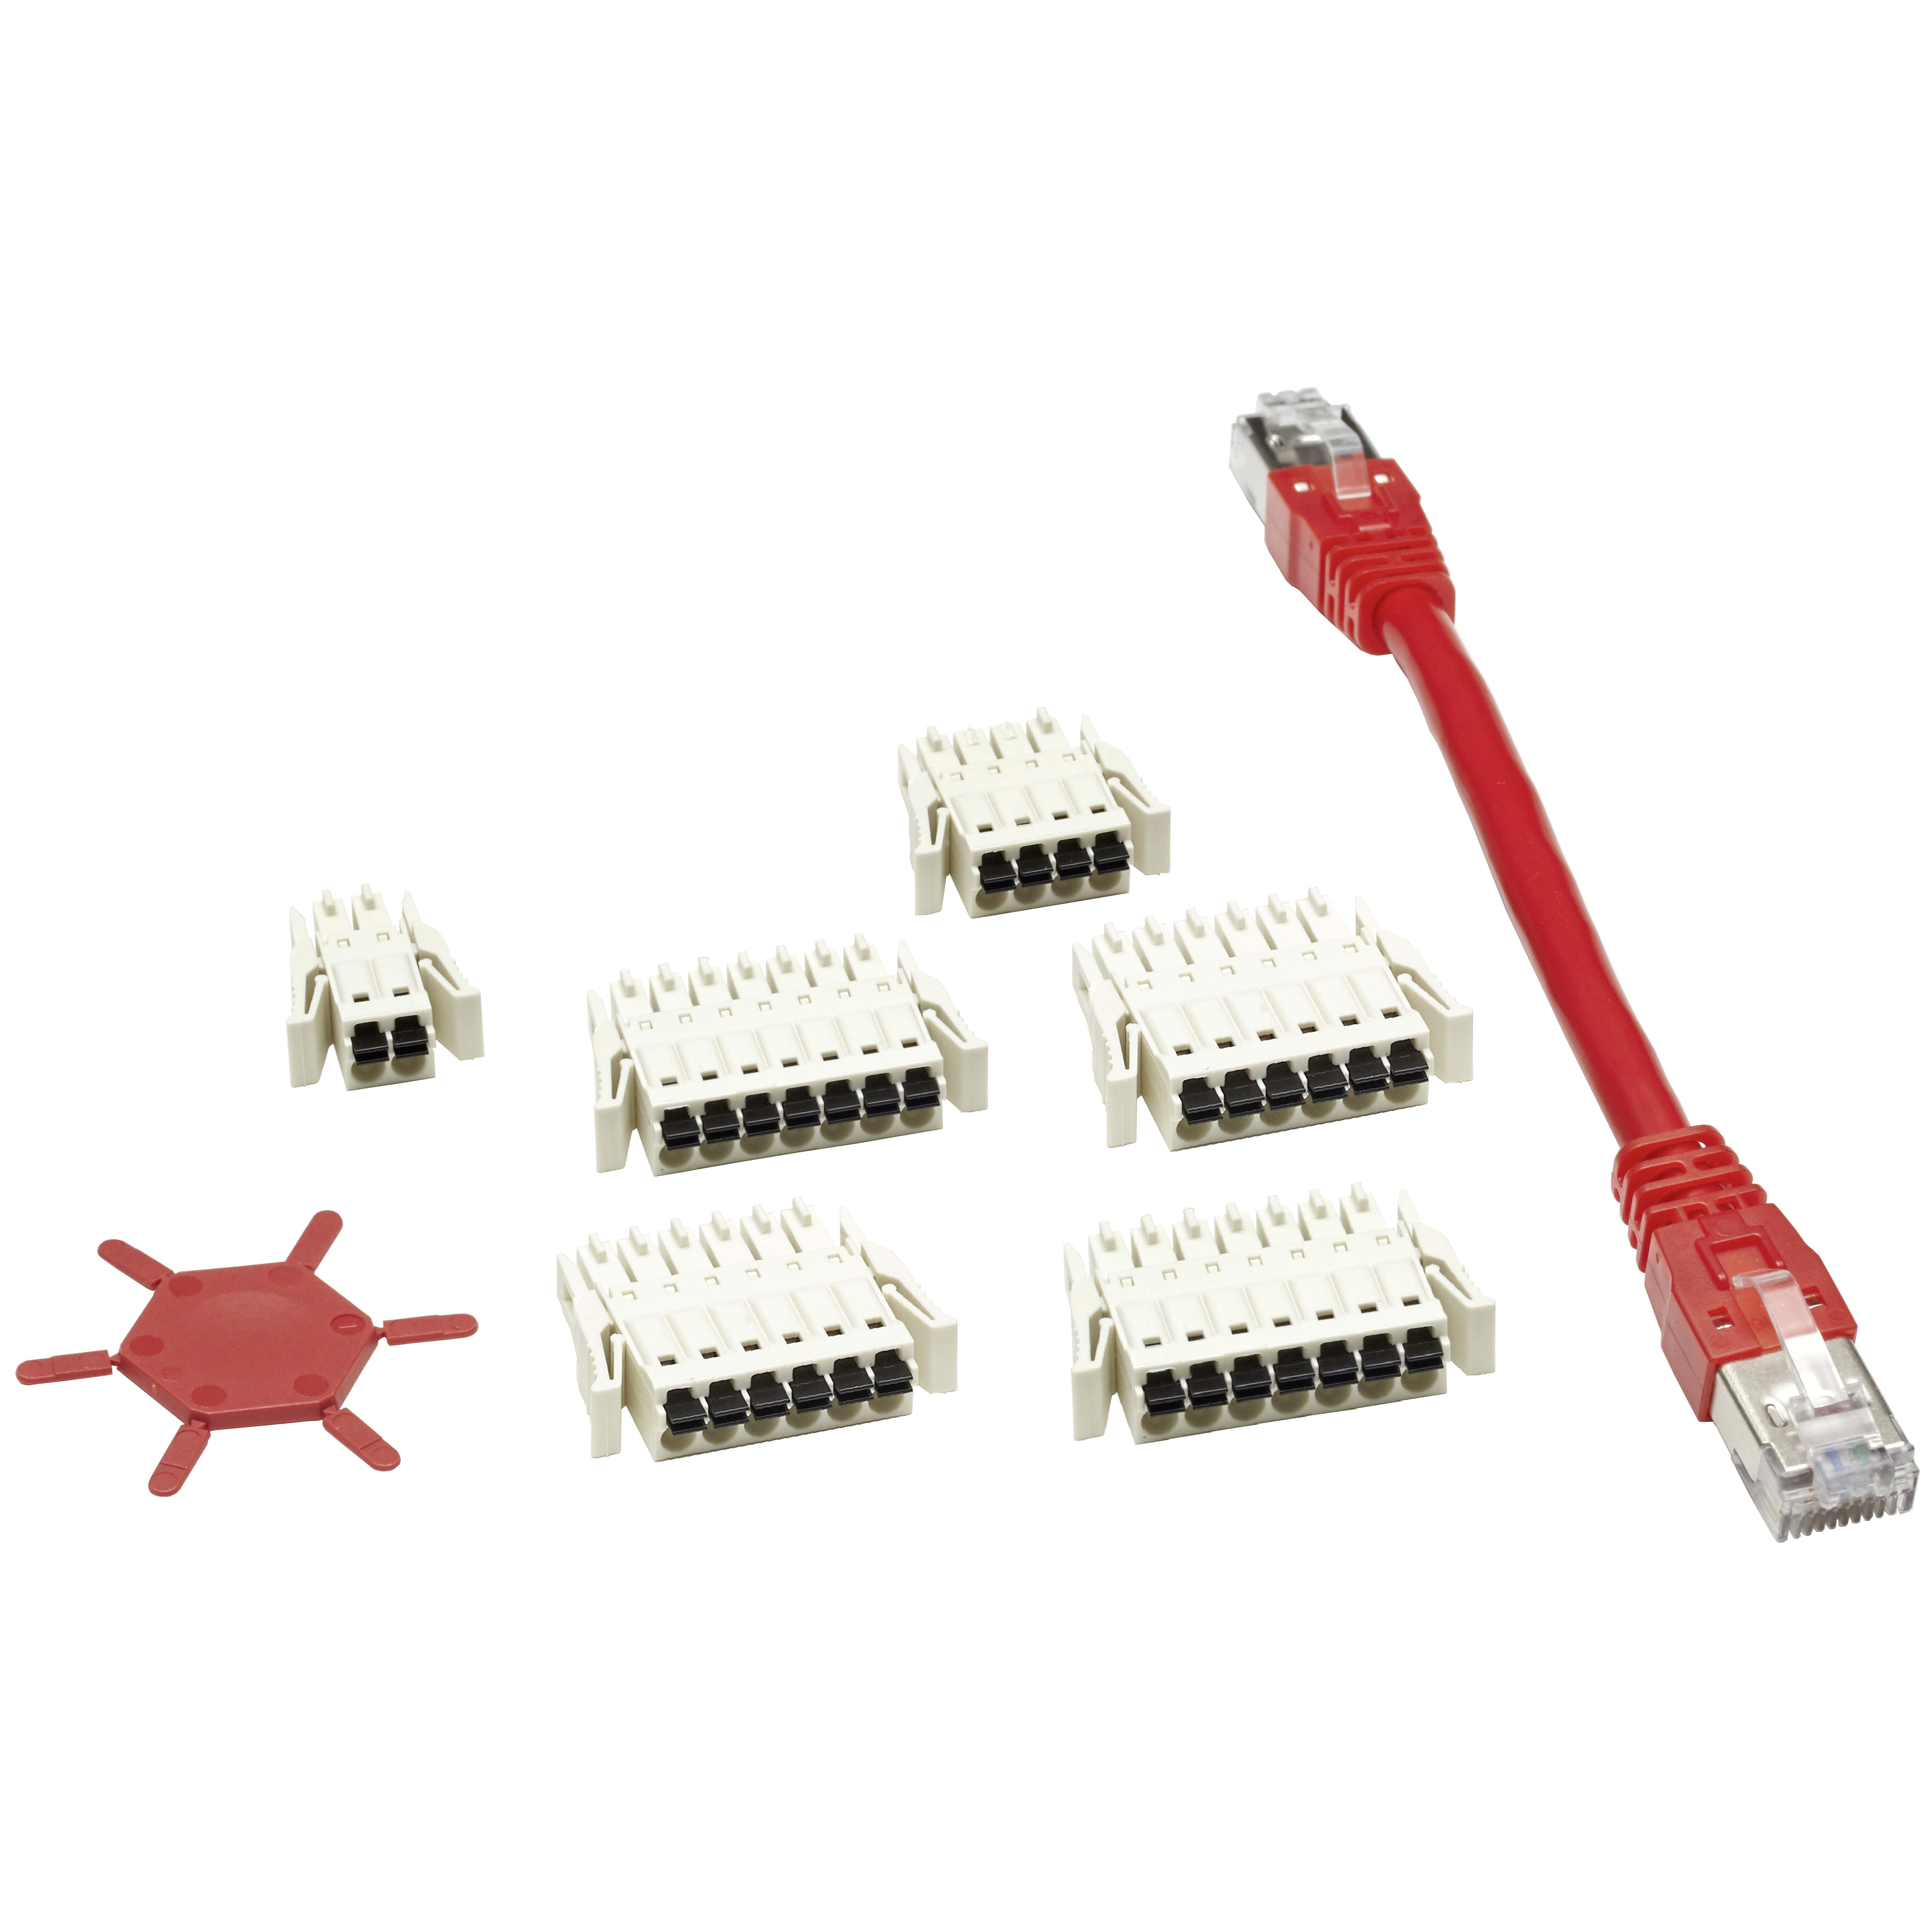 Complete connector set for PacDrive LMC Eco controllers and Sercos cable